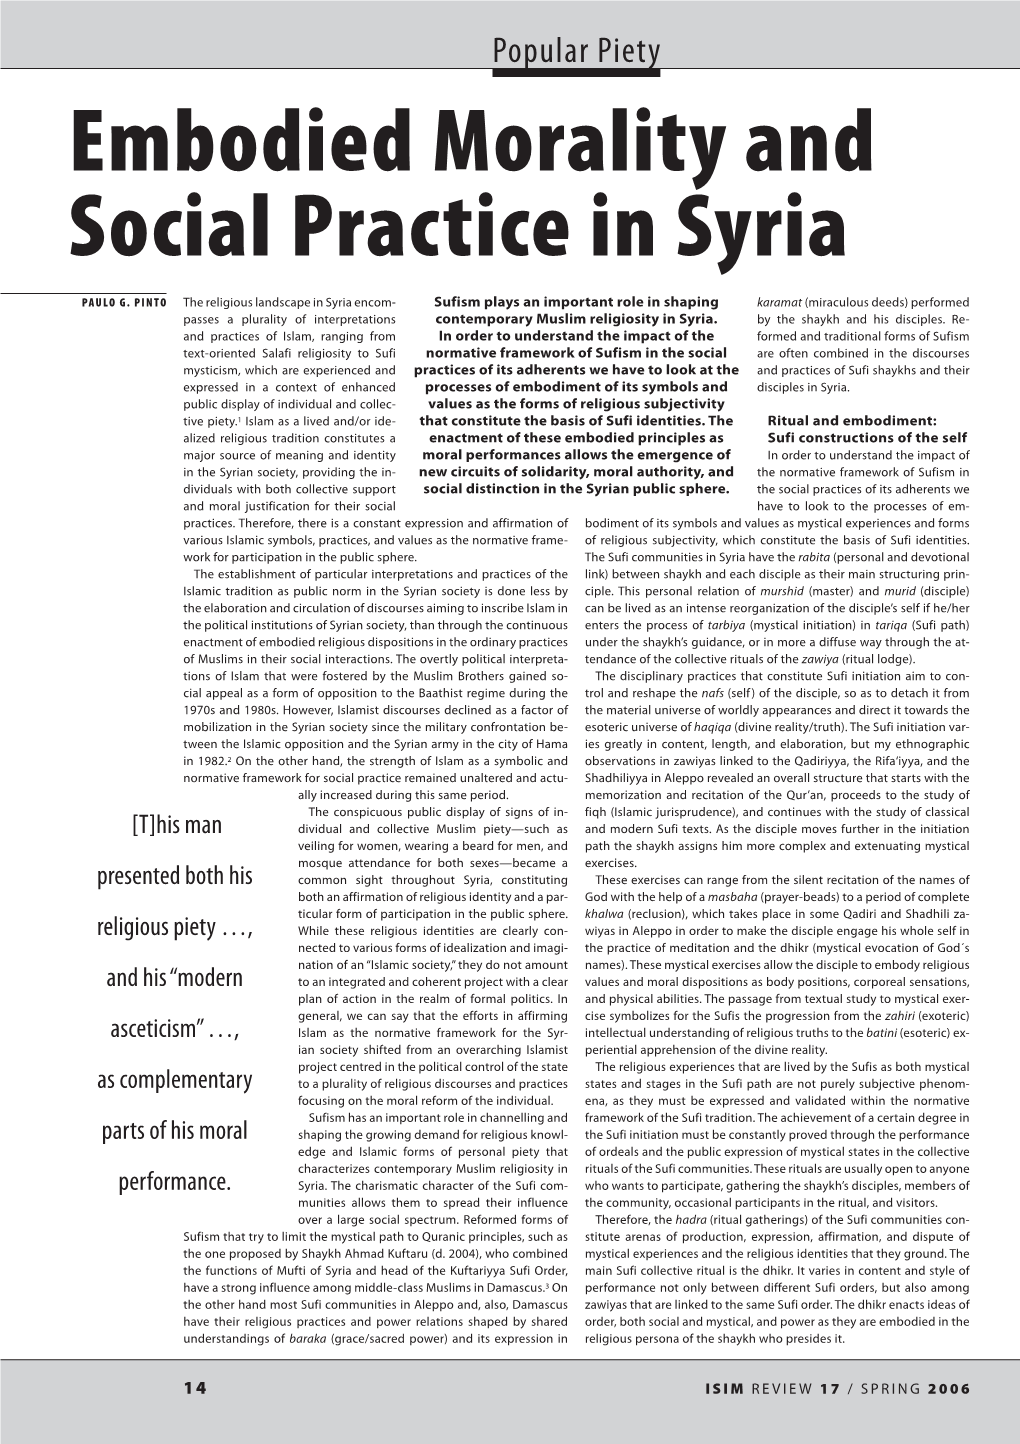 Embodied Morality and Social Practice in Syria